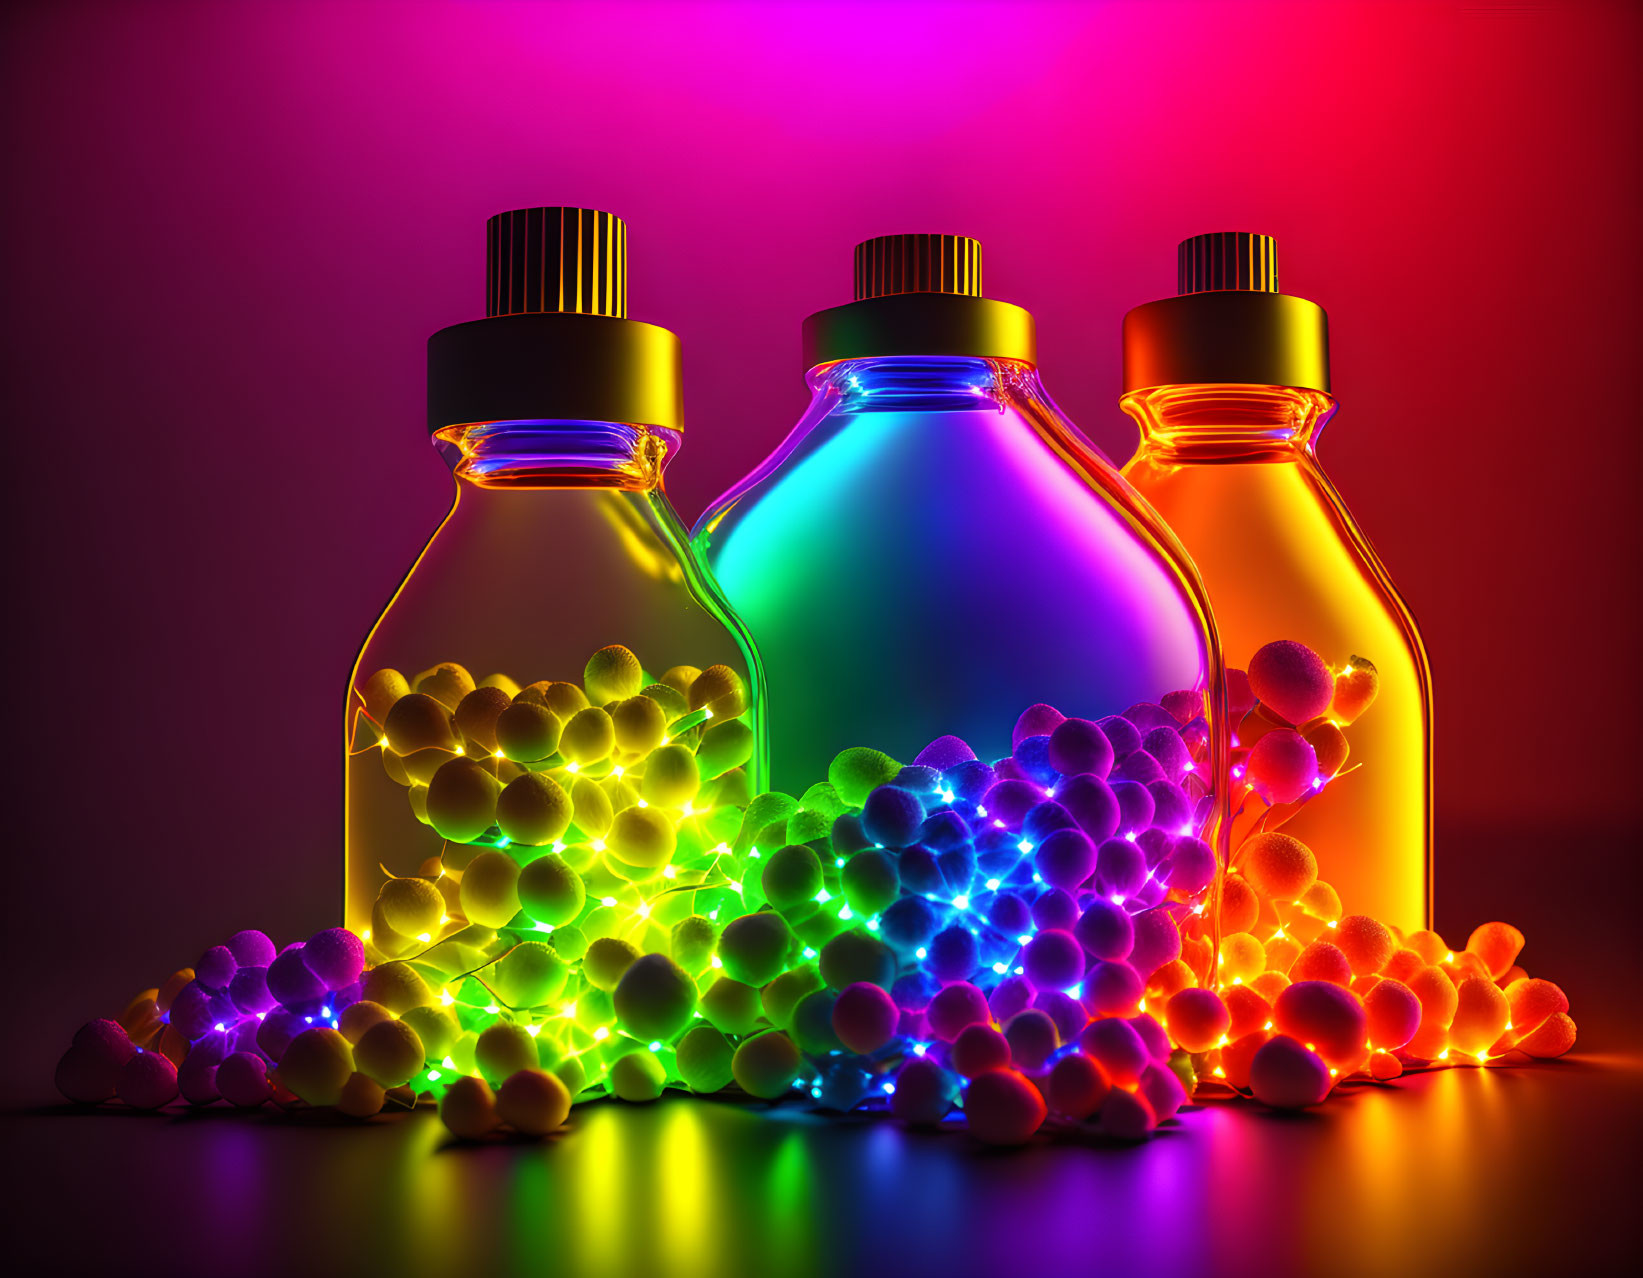 Translucent Bottles with Colorful Liquid under Neon Lights